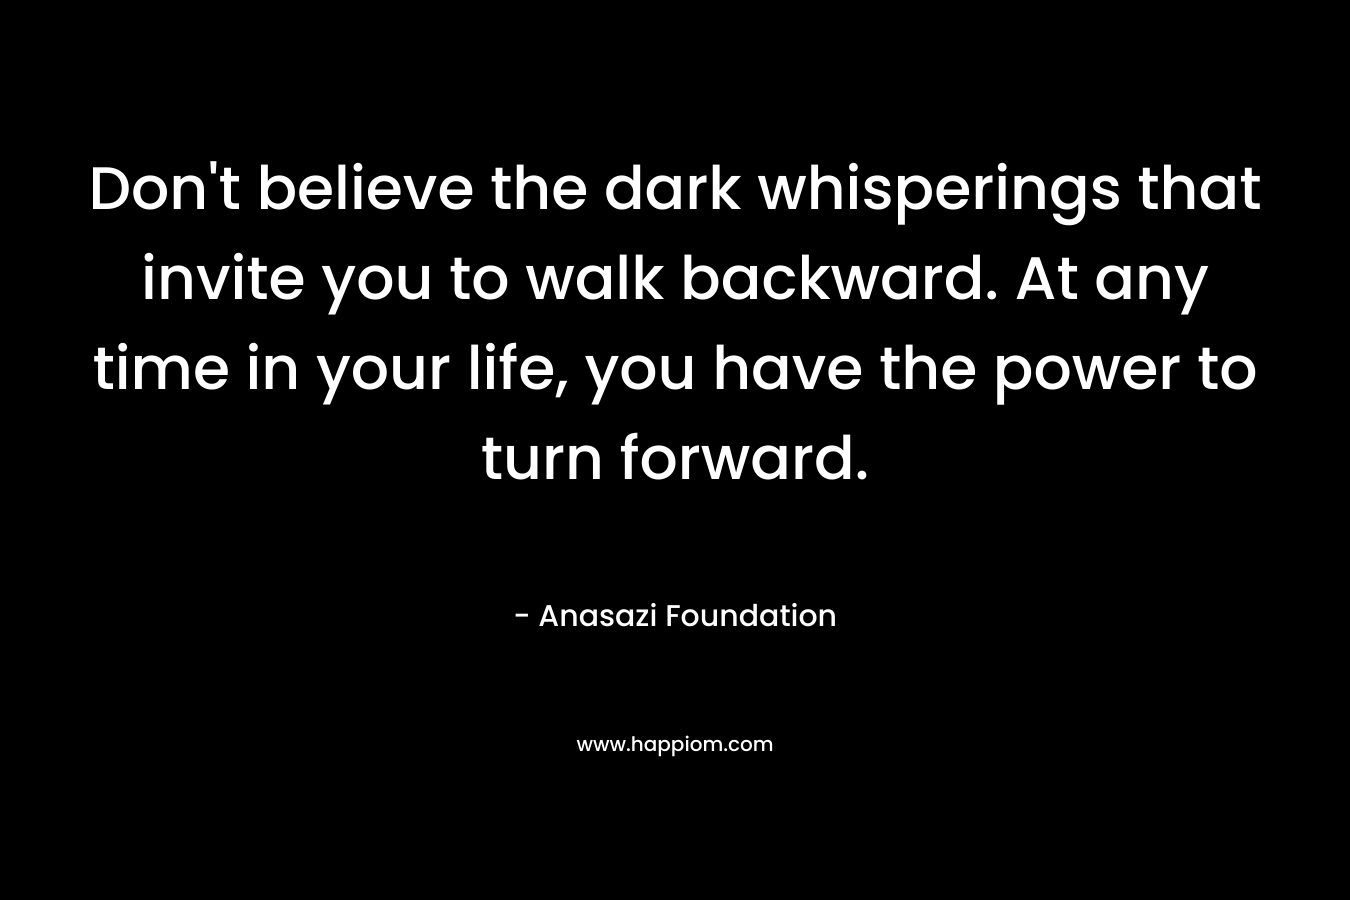 Don’t believe the dark whisperings that invite you to walk backward. At any time in your life, you have the power to turn forward. – Anasazi Foundation